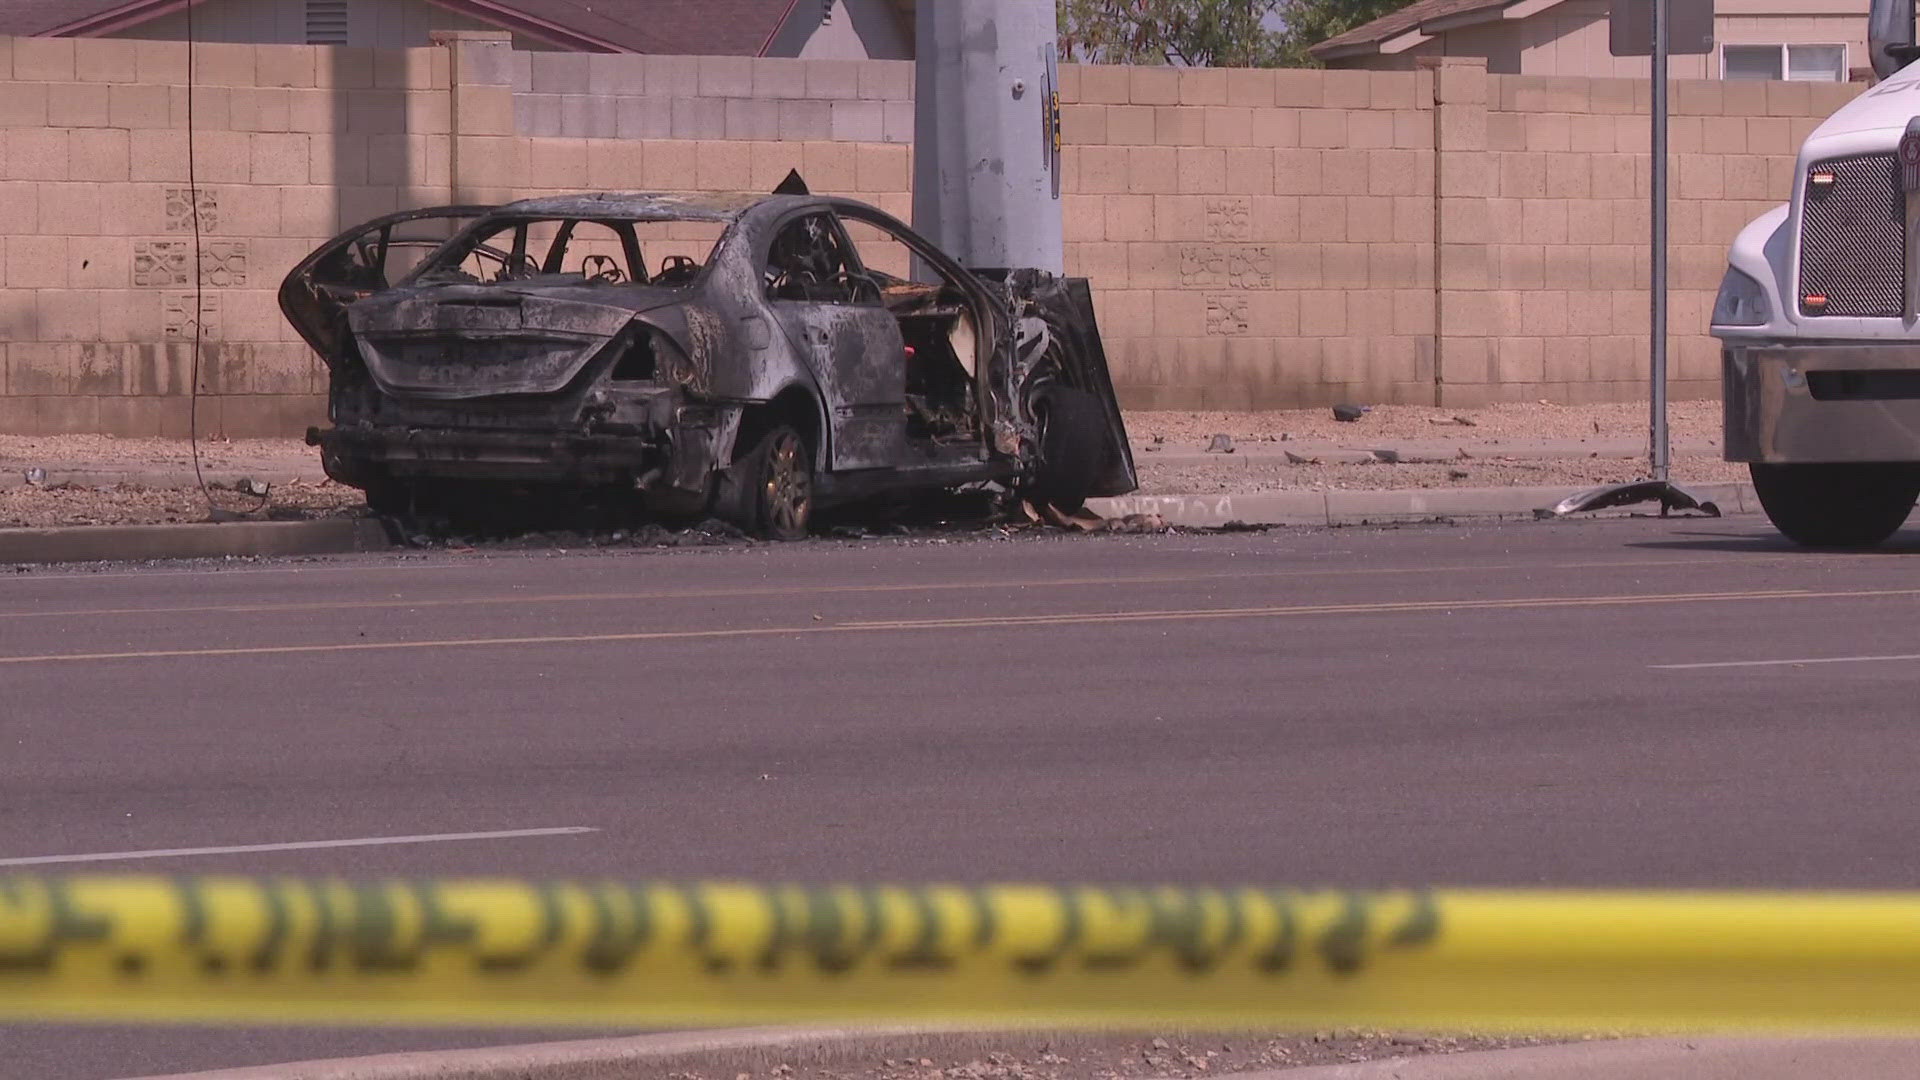 The incident was reported Friday morning near Sweetwater and 35th avenues in north Phoenix.